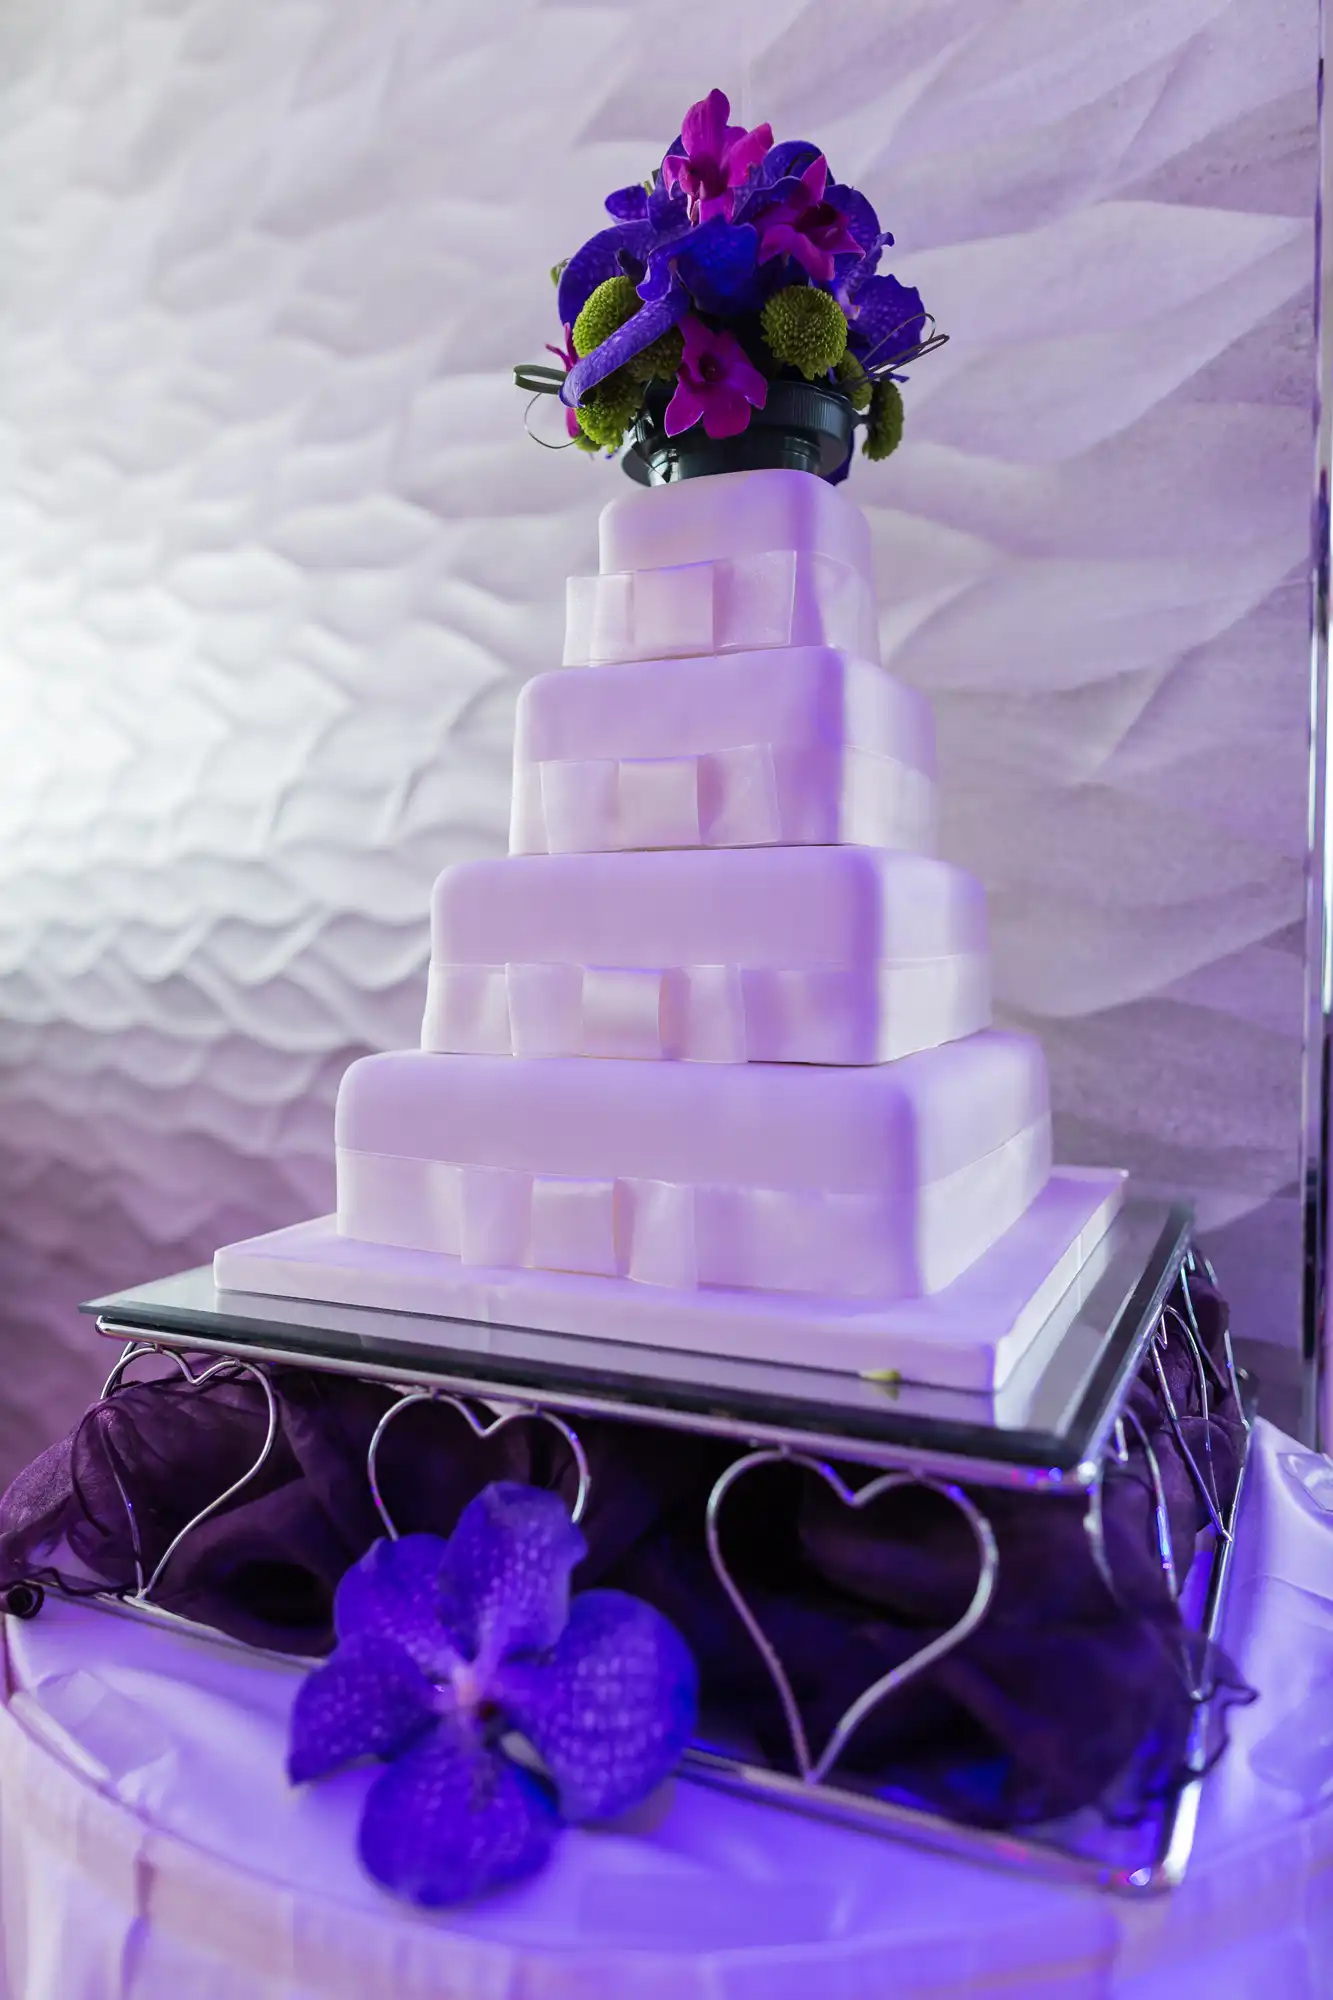 A tiered white wedding cake adorned with purple and blue flowers, displayed on a table with a violet uplighting.